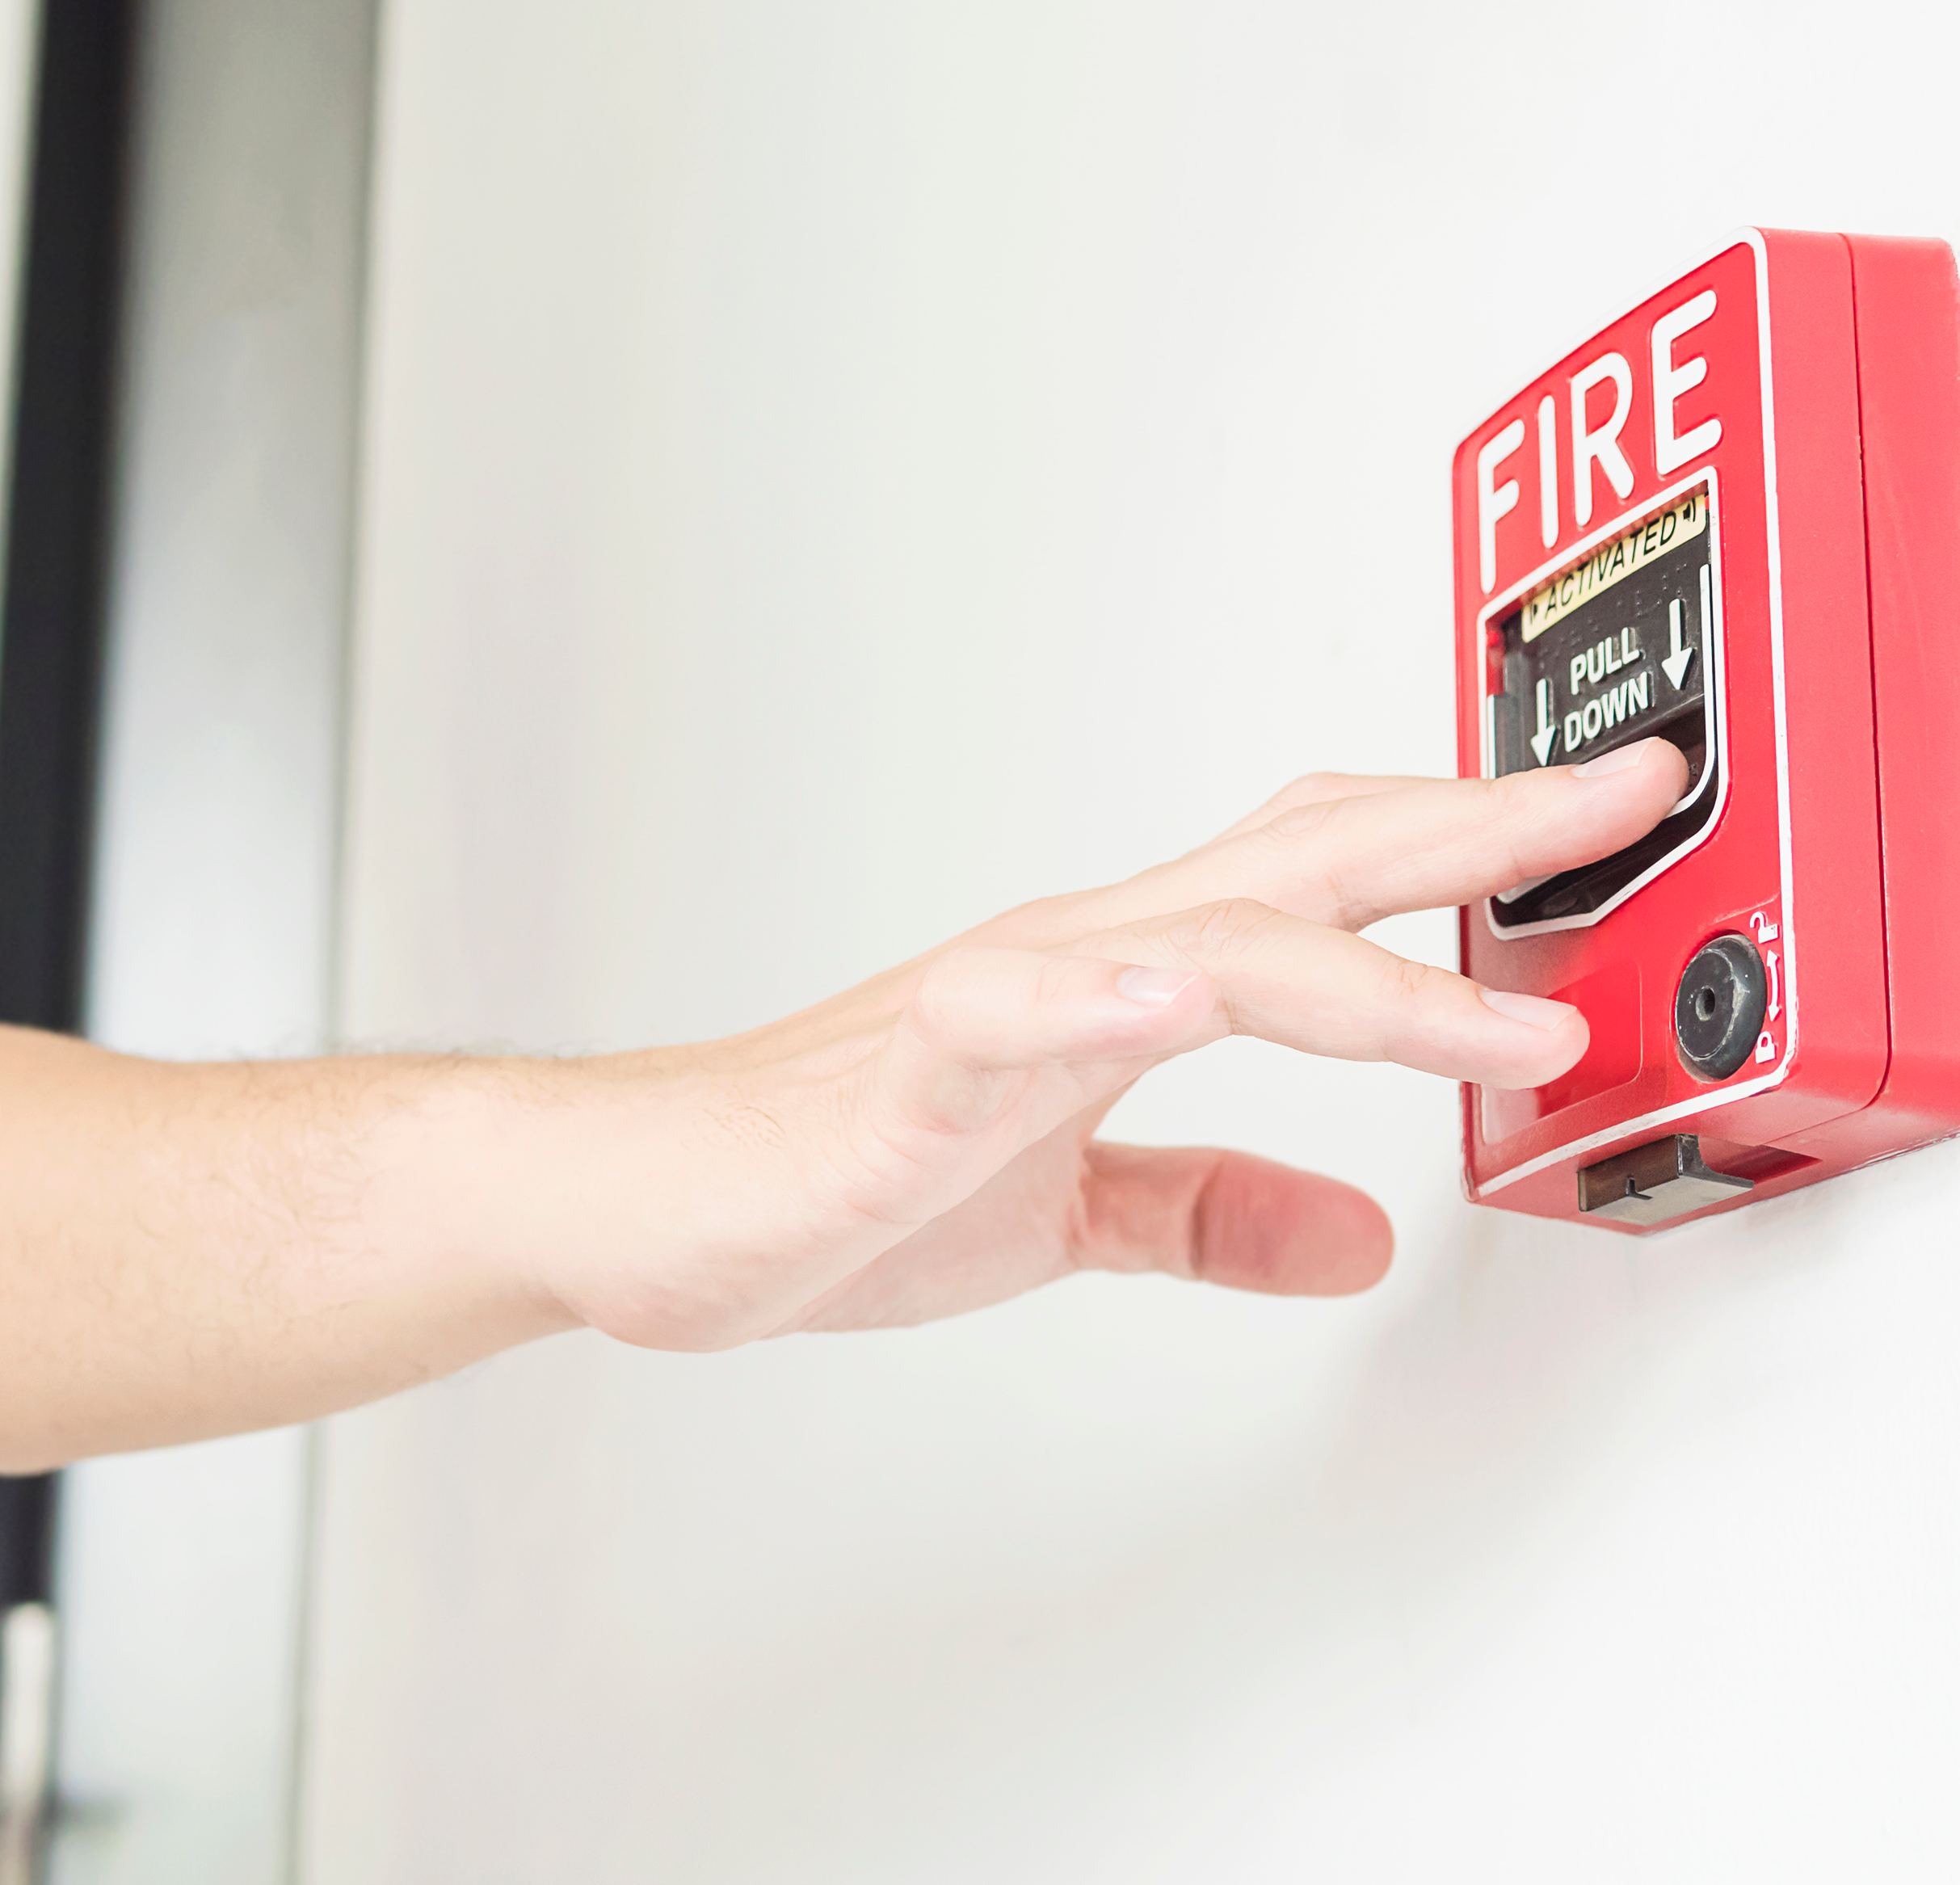 man-is-reaching-his-hand-to-push-fire-alarm-hand-station